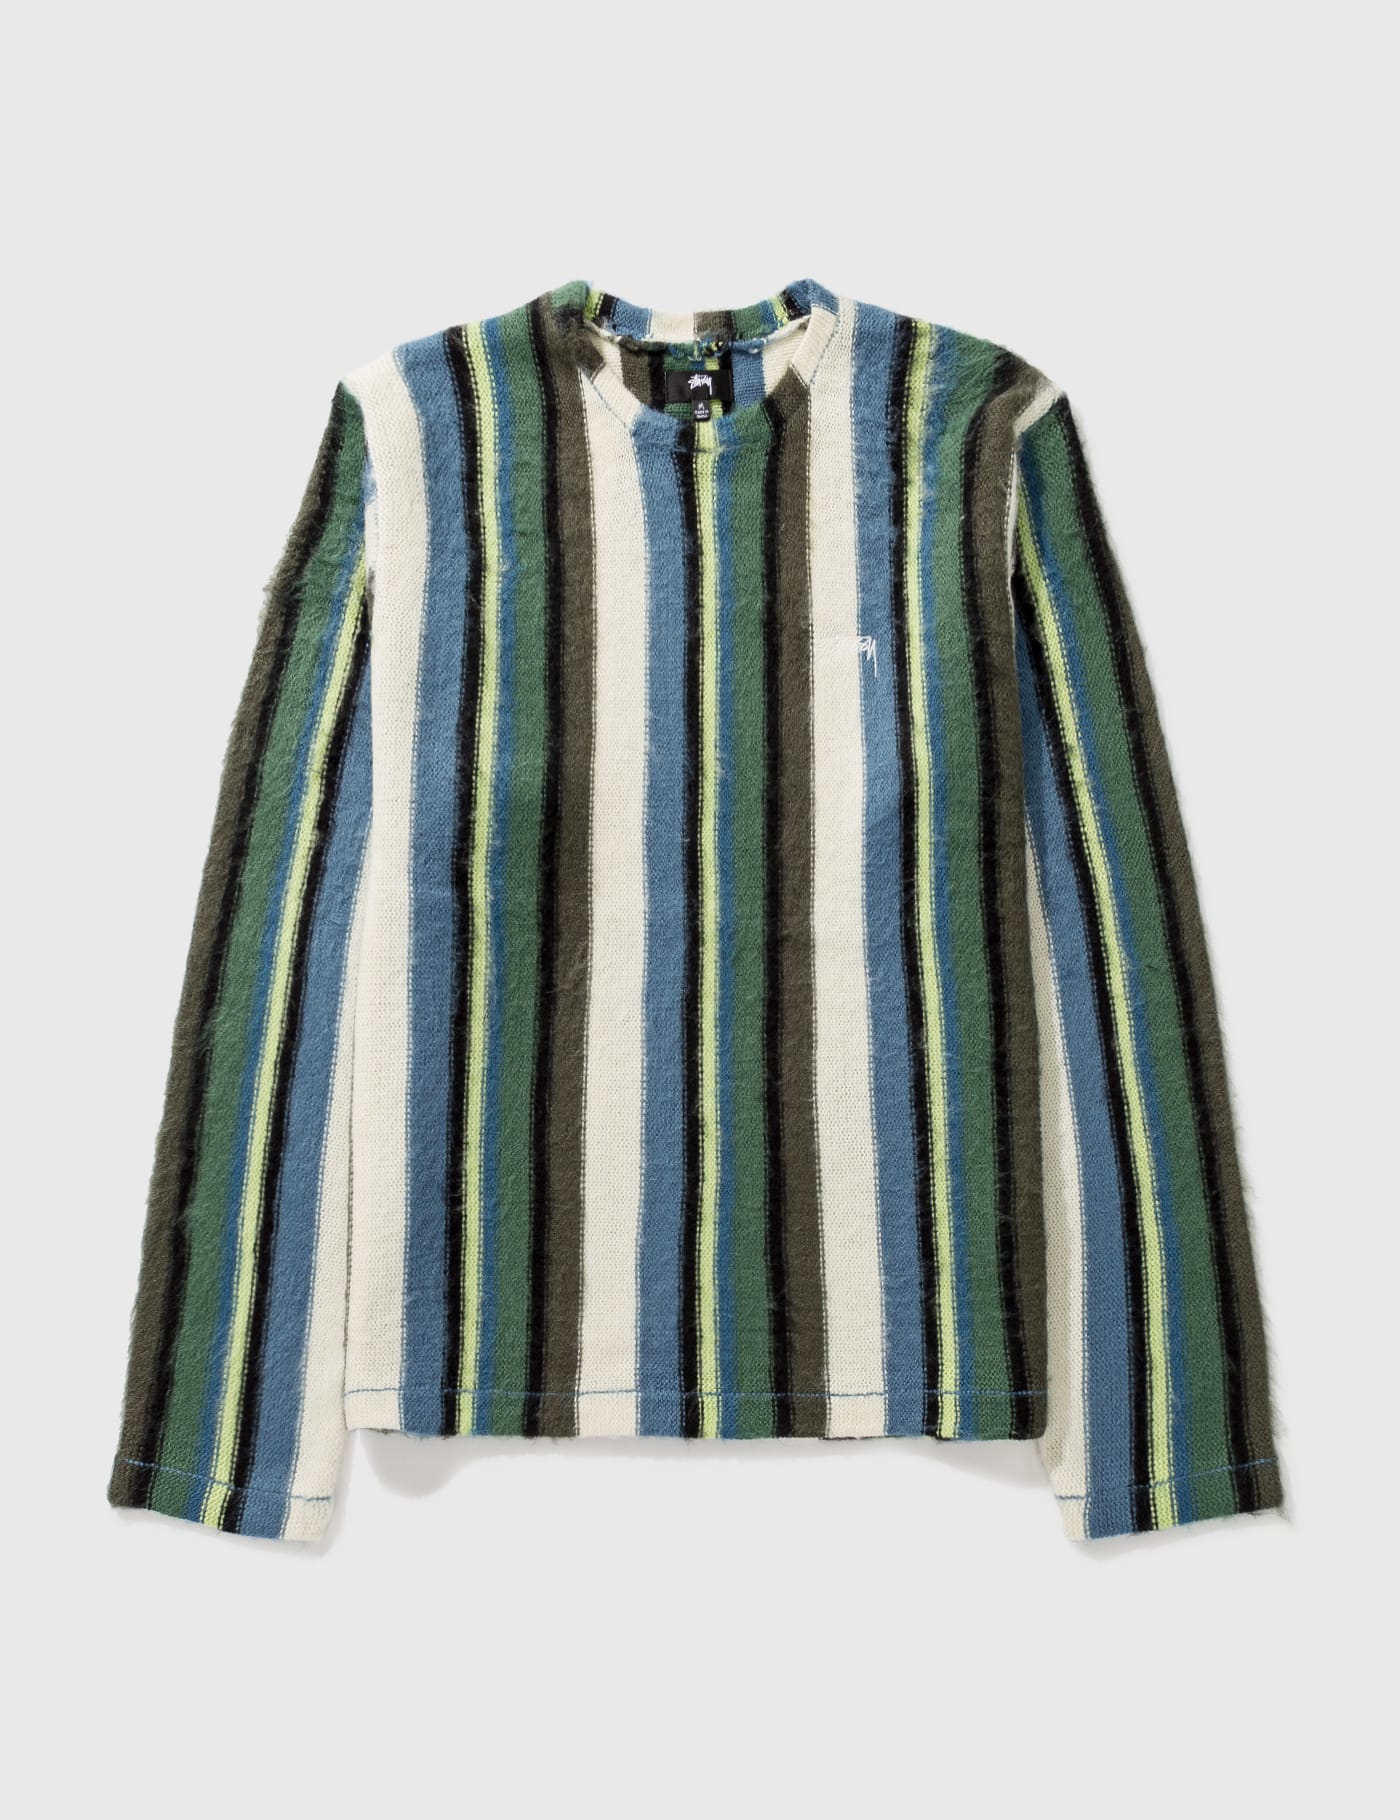 Stüssy - Vertical Striped Knit Crew | HBX - Globally Curated ...